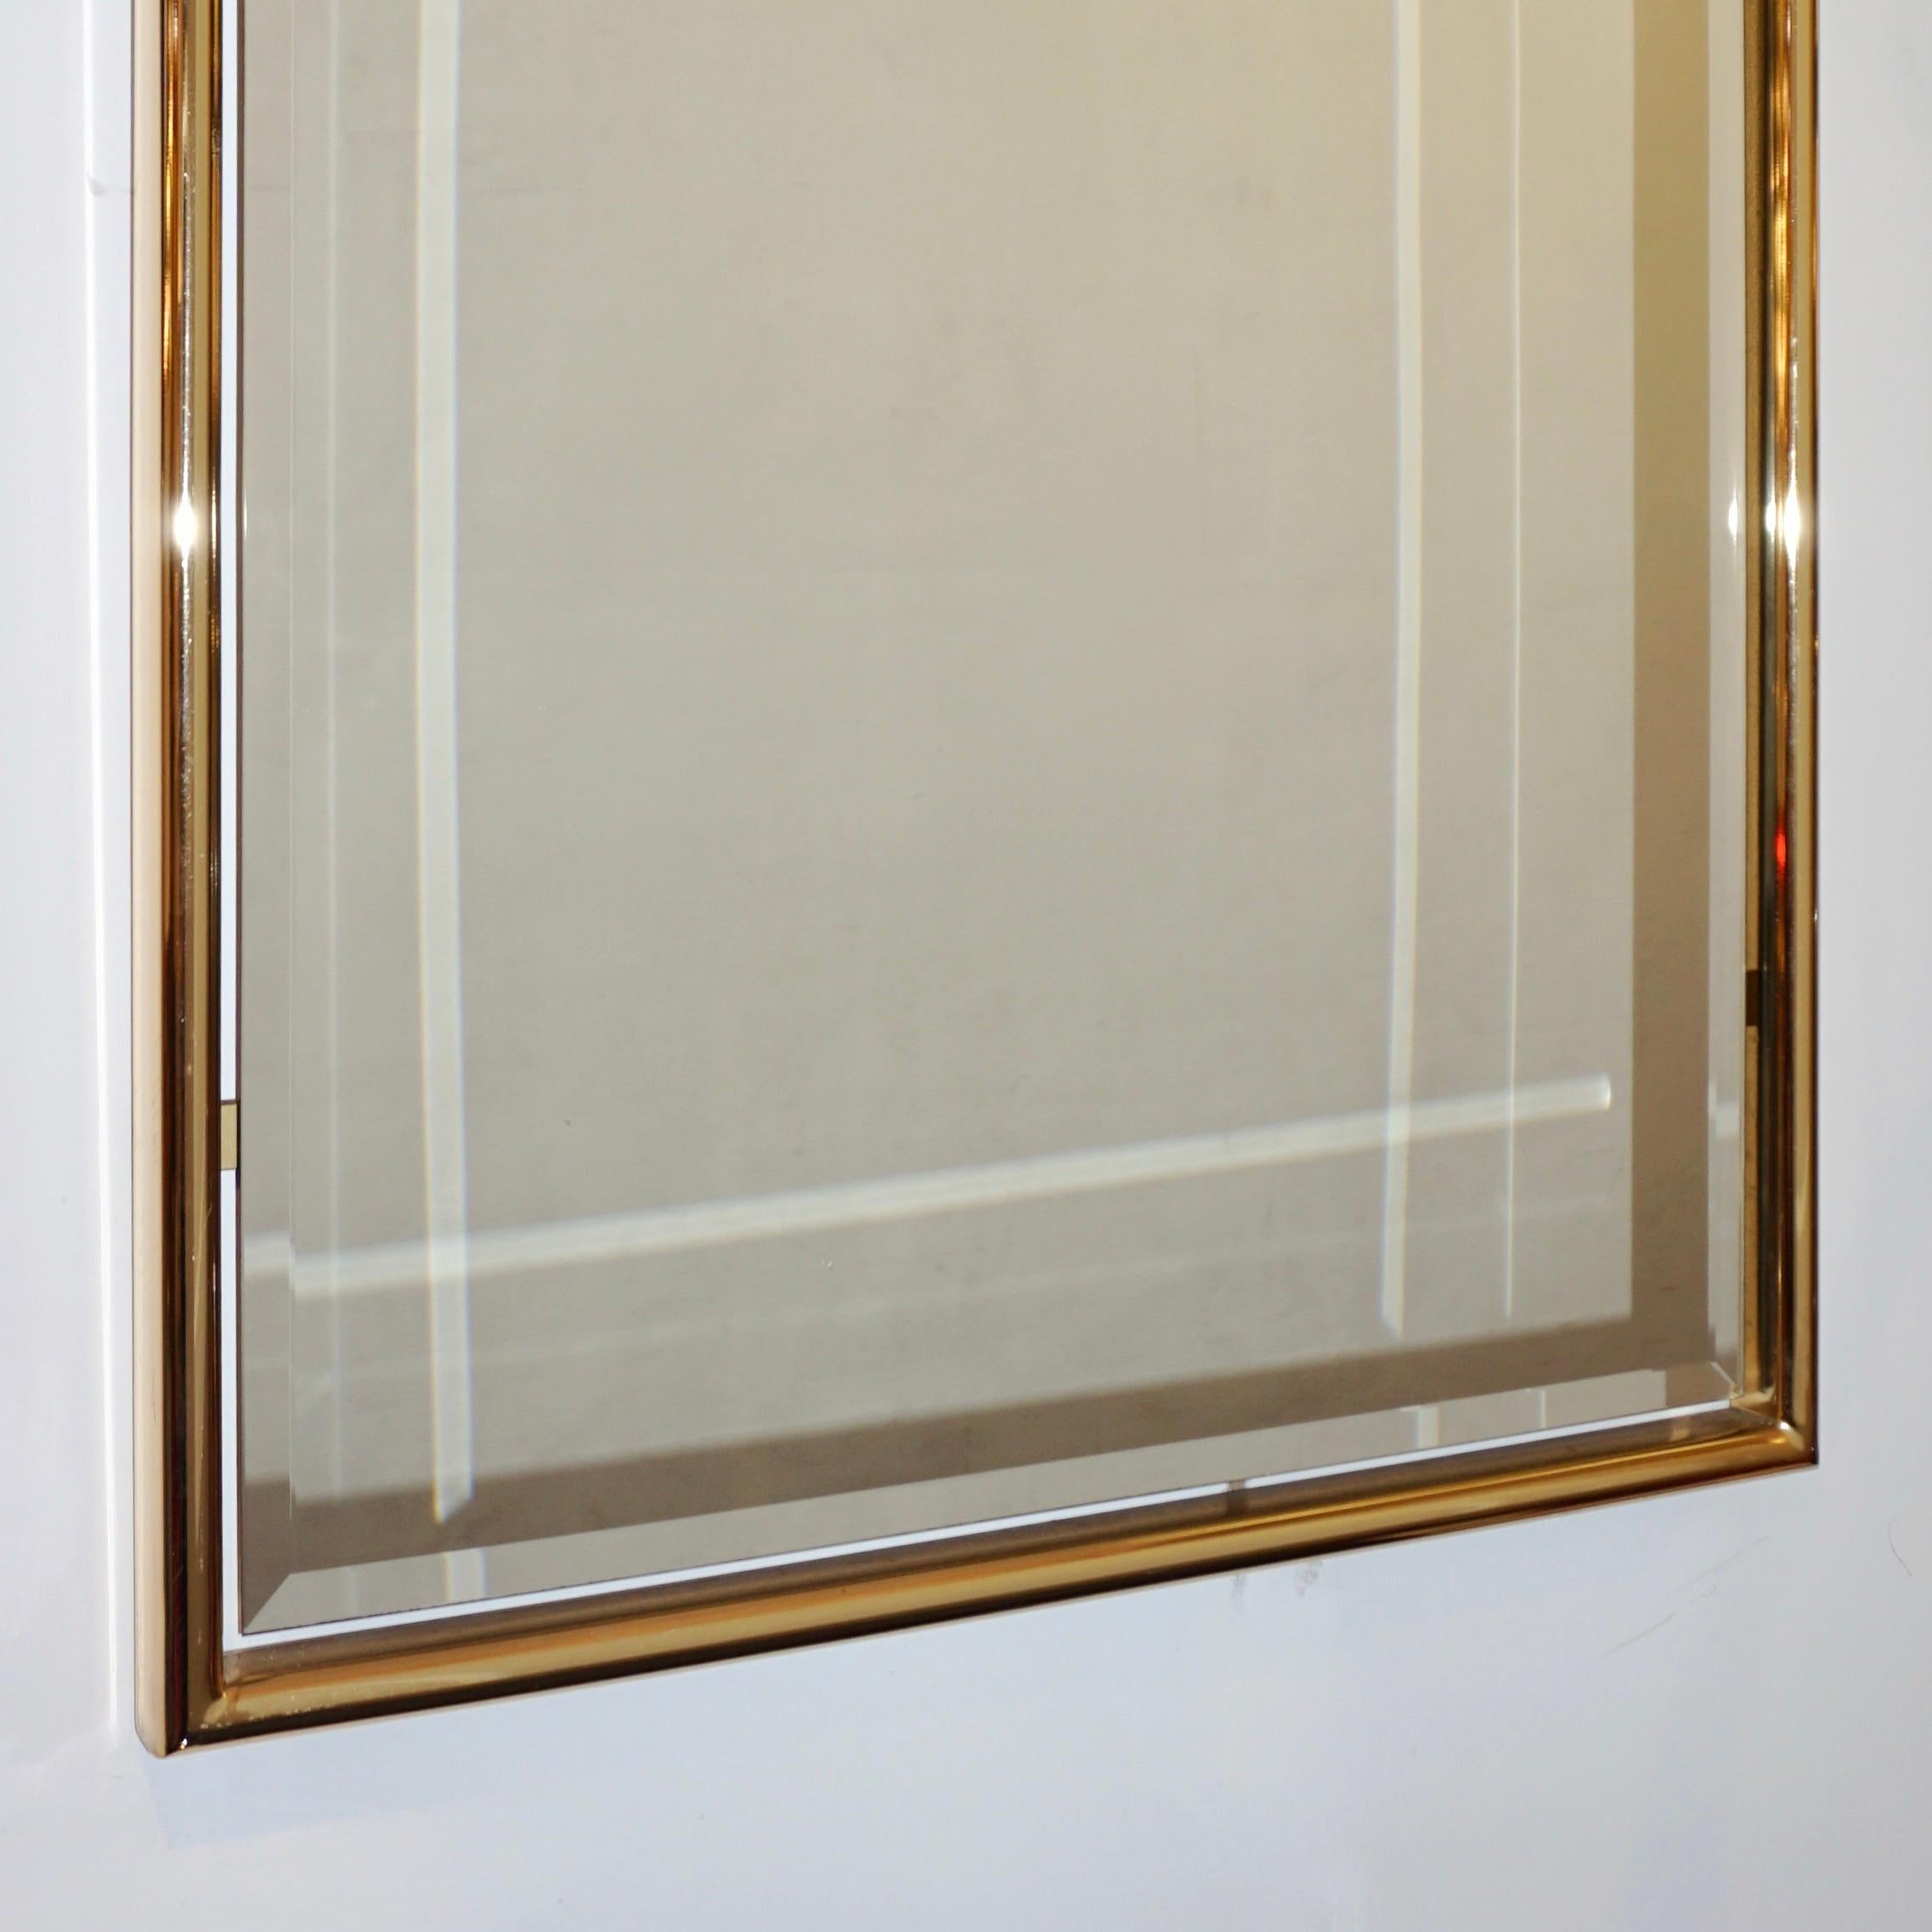 Hand-Crafted 1960s Italian Minimalist Brass Floating Mirror with Round Arched Top Frame For Sale